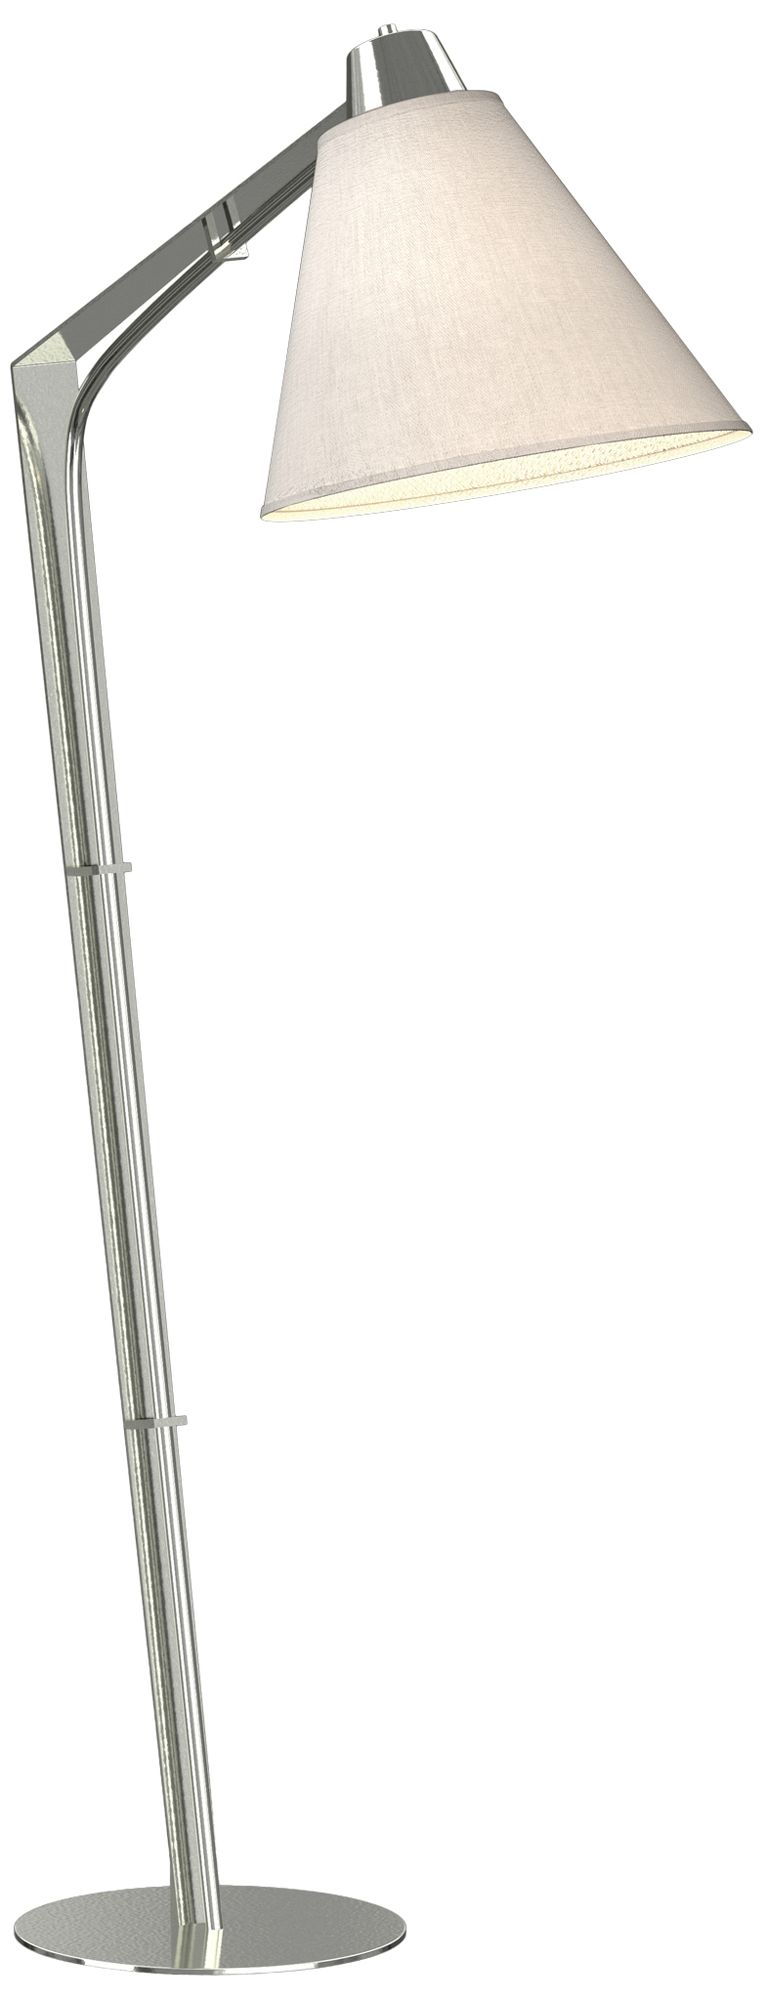 Reach 55.2" High Sterling Floor Lamp With Flax Shade